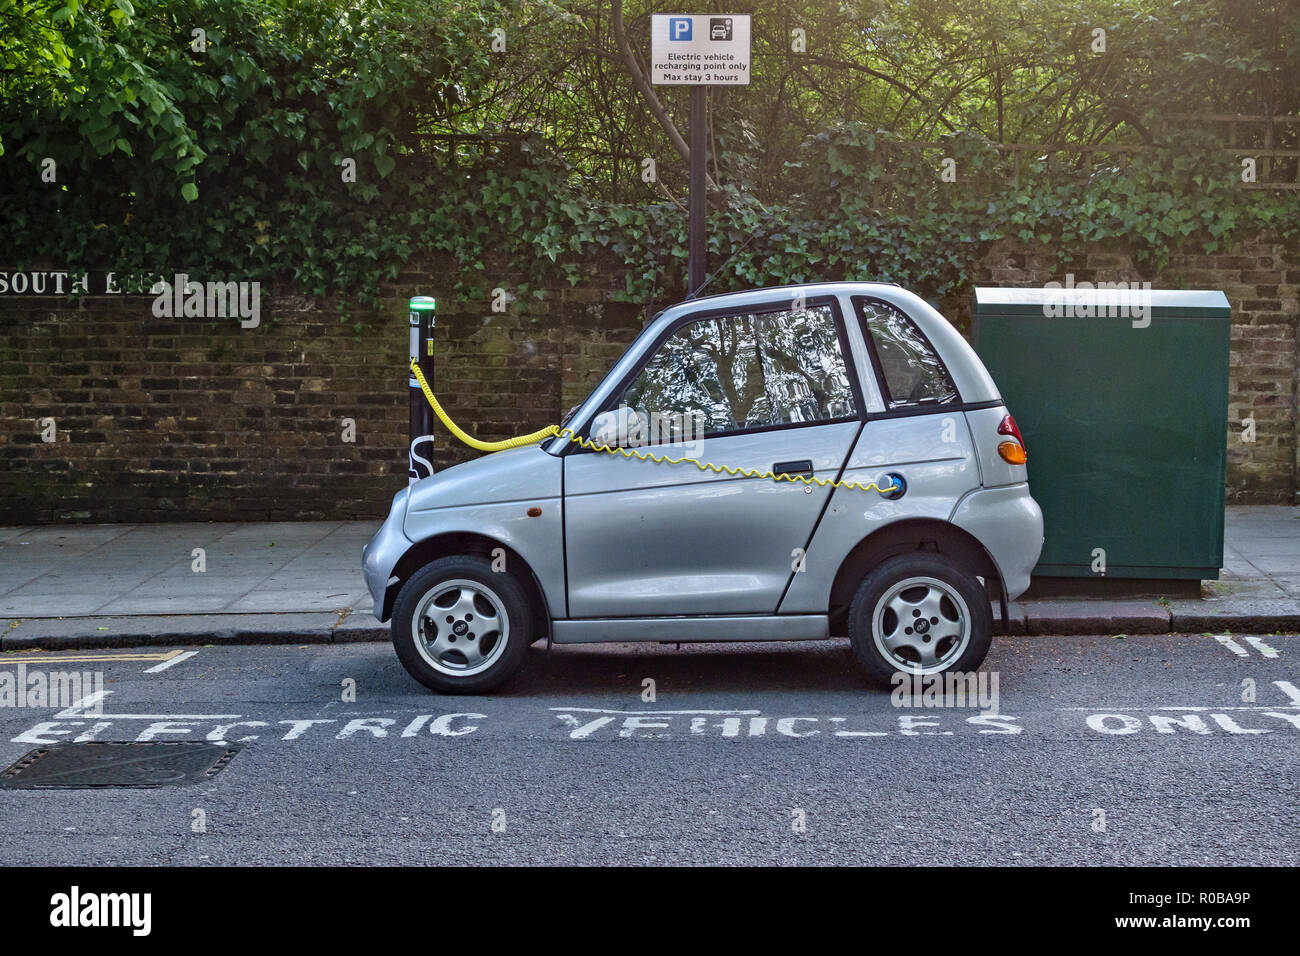 https://c8.alamy.com/comp/R0BA9P/hampstead-london-uk-a-g-wiz-micro-electric-car-at-a-kerbside-recharging-point-in-a-marked-bay-R0BA9P.jpg